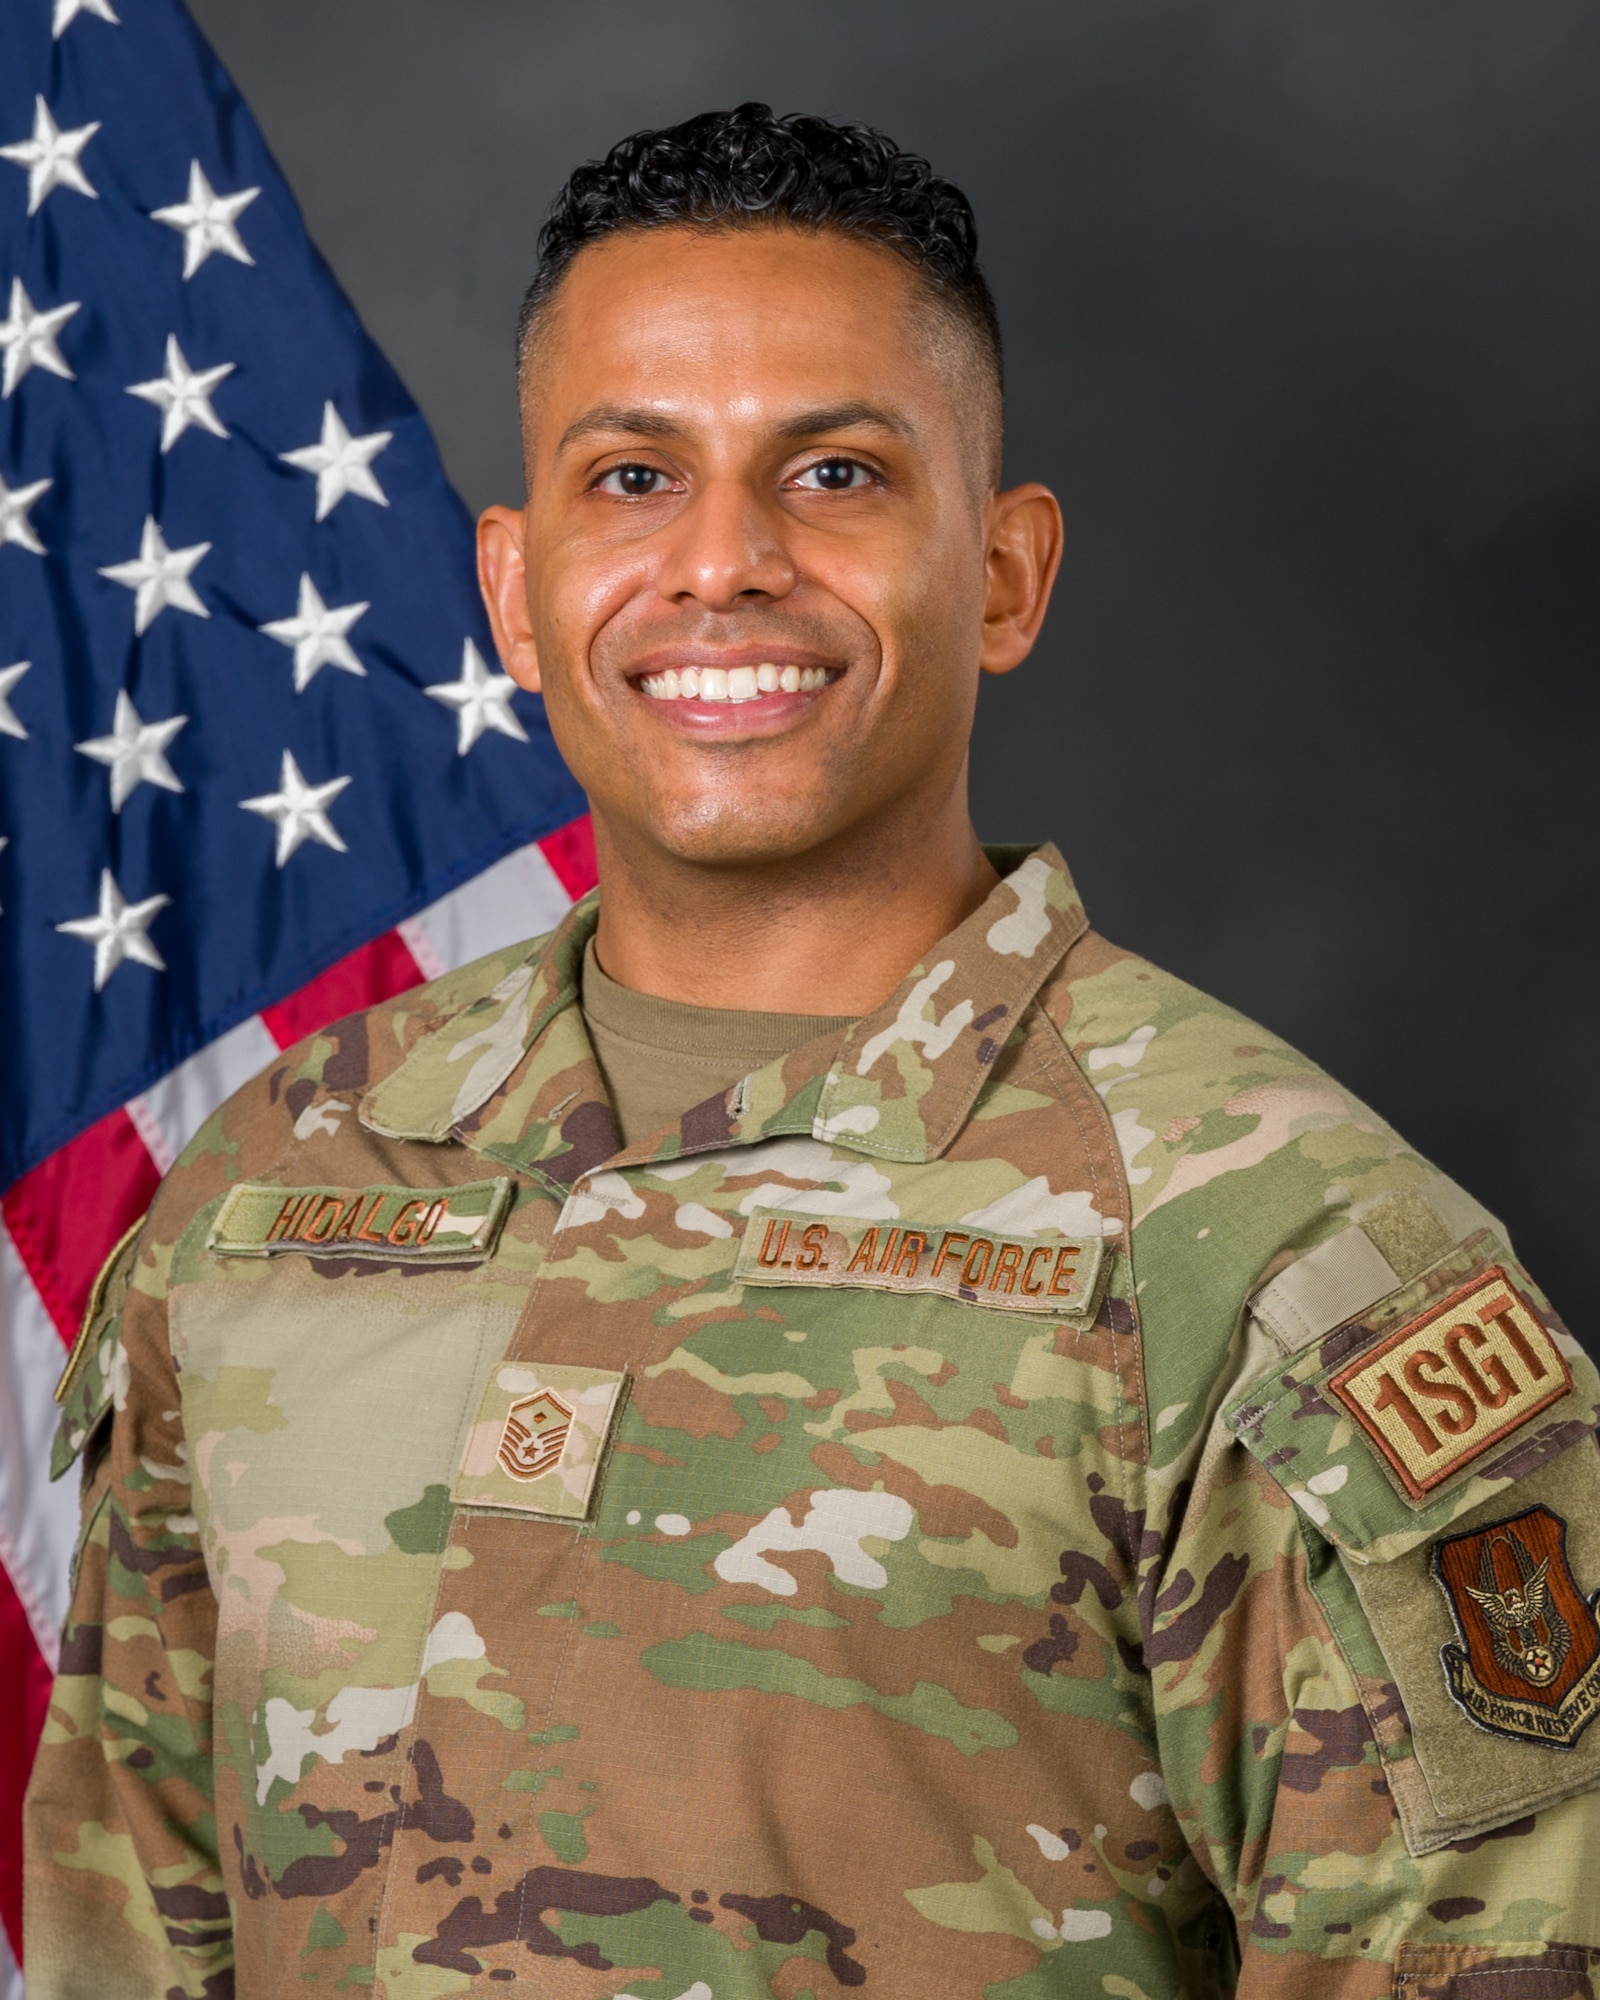 Official photo of Master Sgt. Misael Hidalgo (U.S. Air Force photo by Tech. Sgt Lionel Castellano)